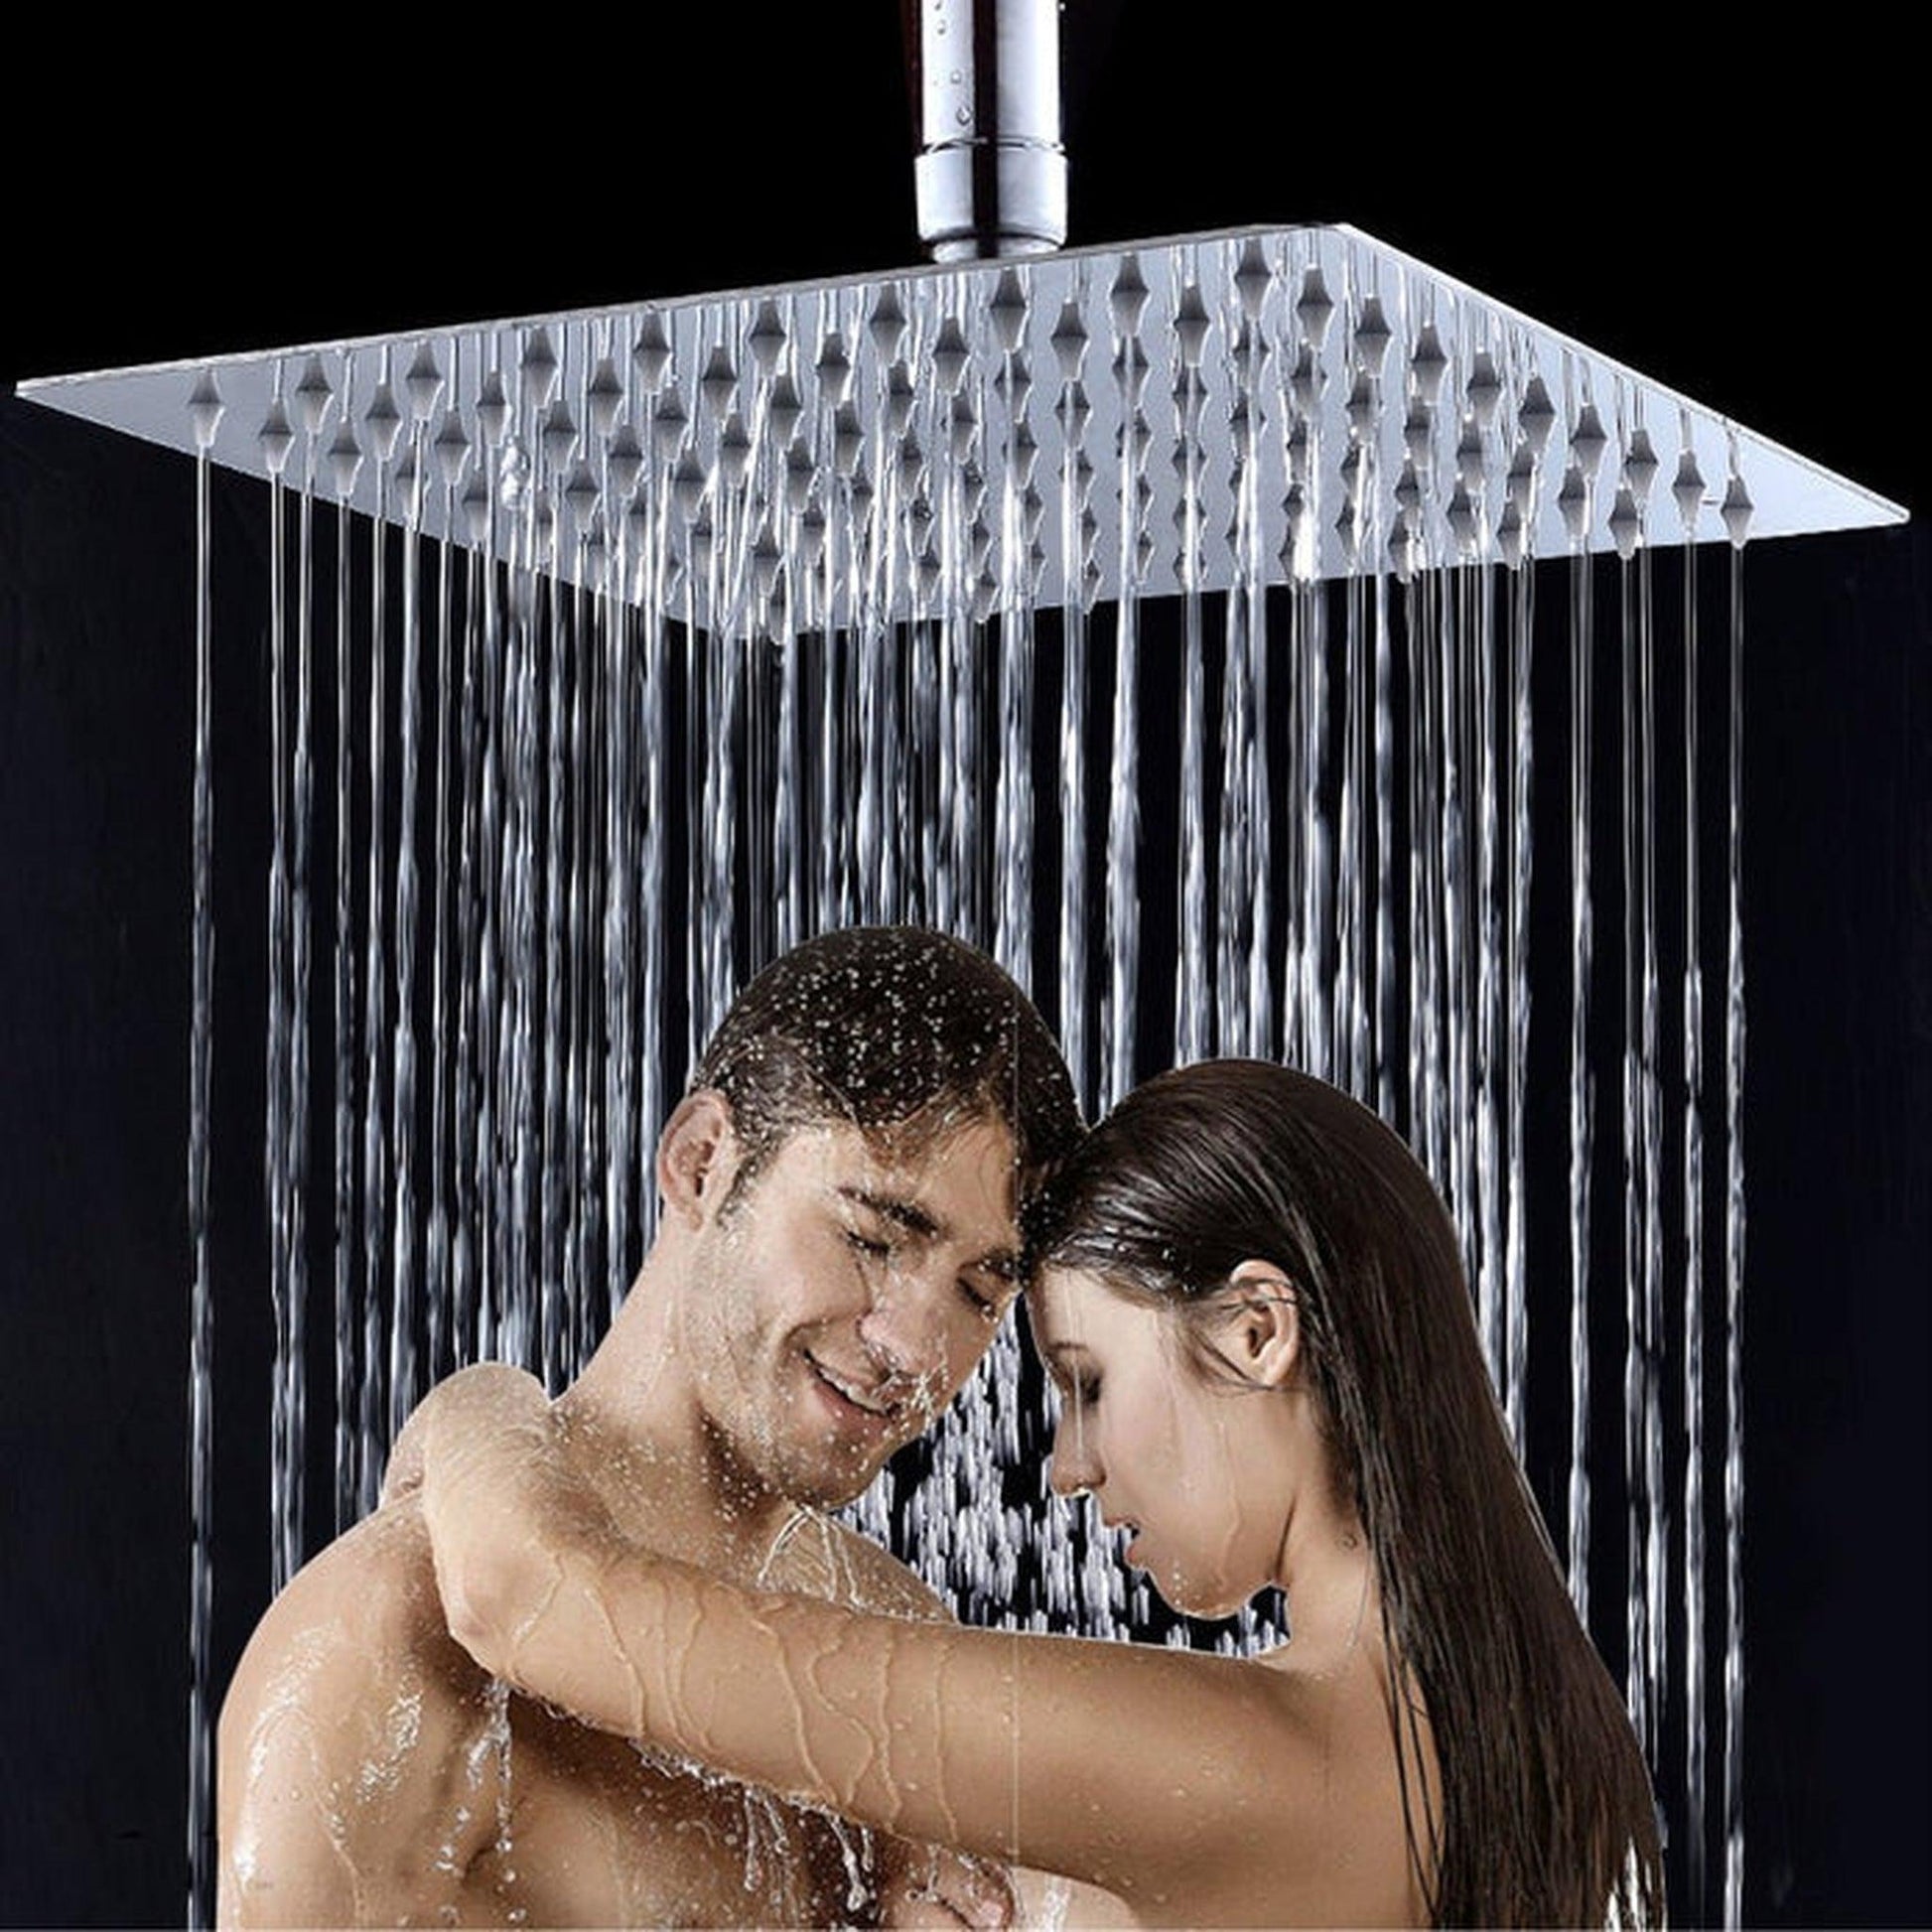 Vanity Art 8" Brushed Nickel Stainless Steel Ceiling Mount Square Rain Showerhead With Waterfall Full Body Coverage